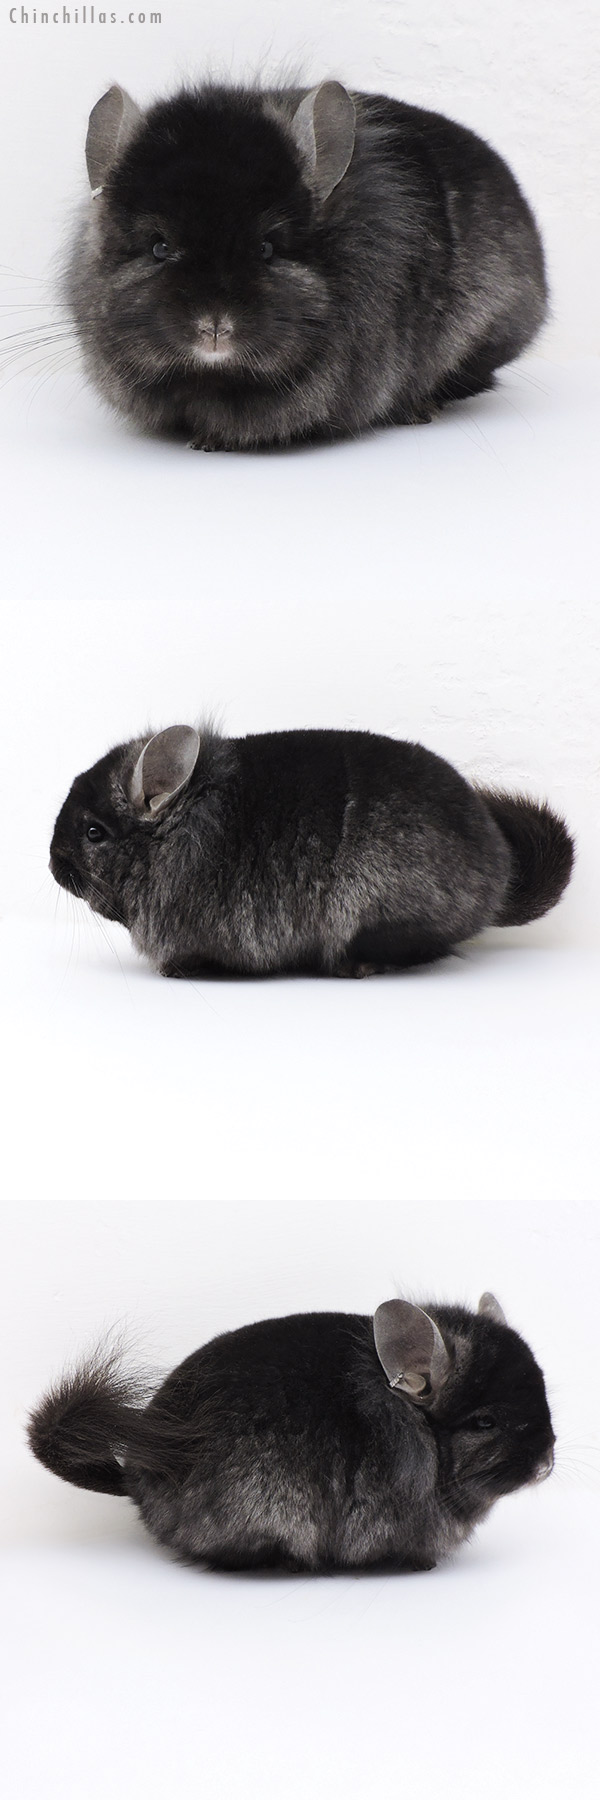 Chinchilla or related item offered for sale or export on Chinchillas.com - 18013 Exceptional Blocky Ebony  Royal Persian Angora Male Chinchilla with Lion Mane